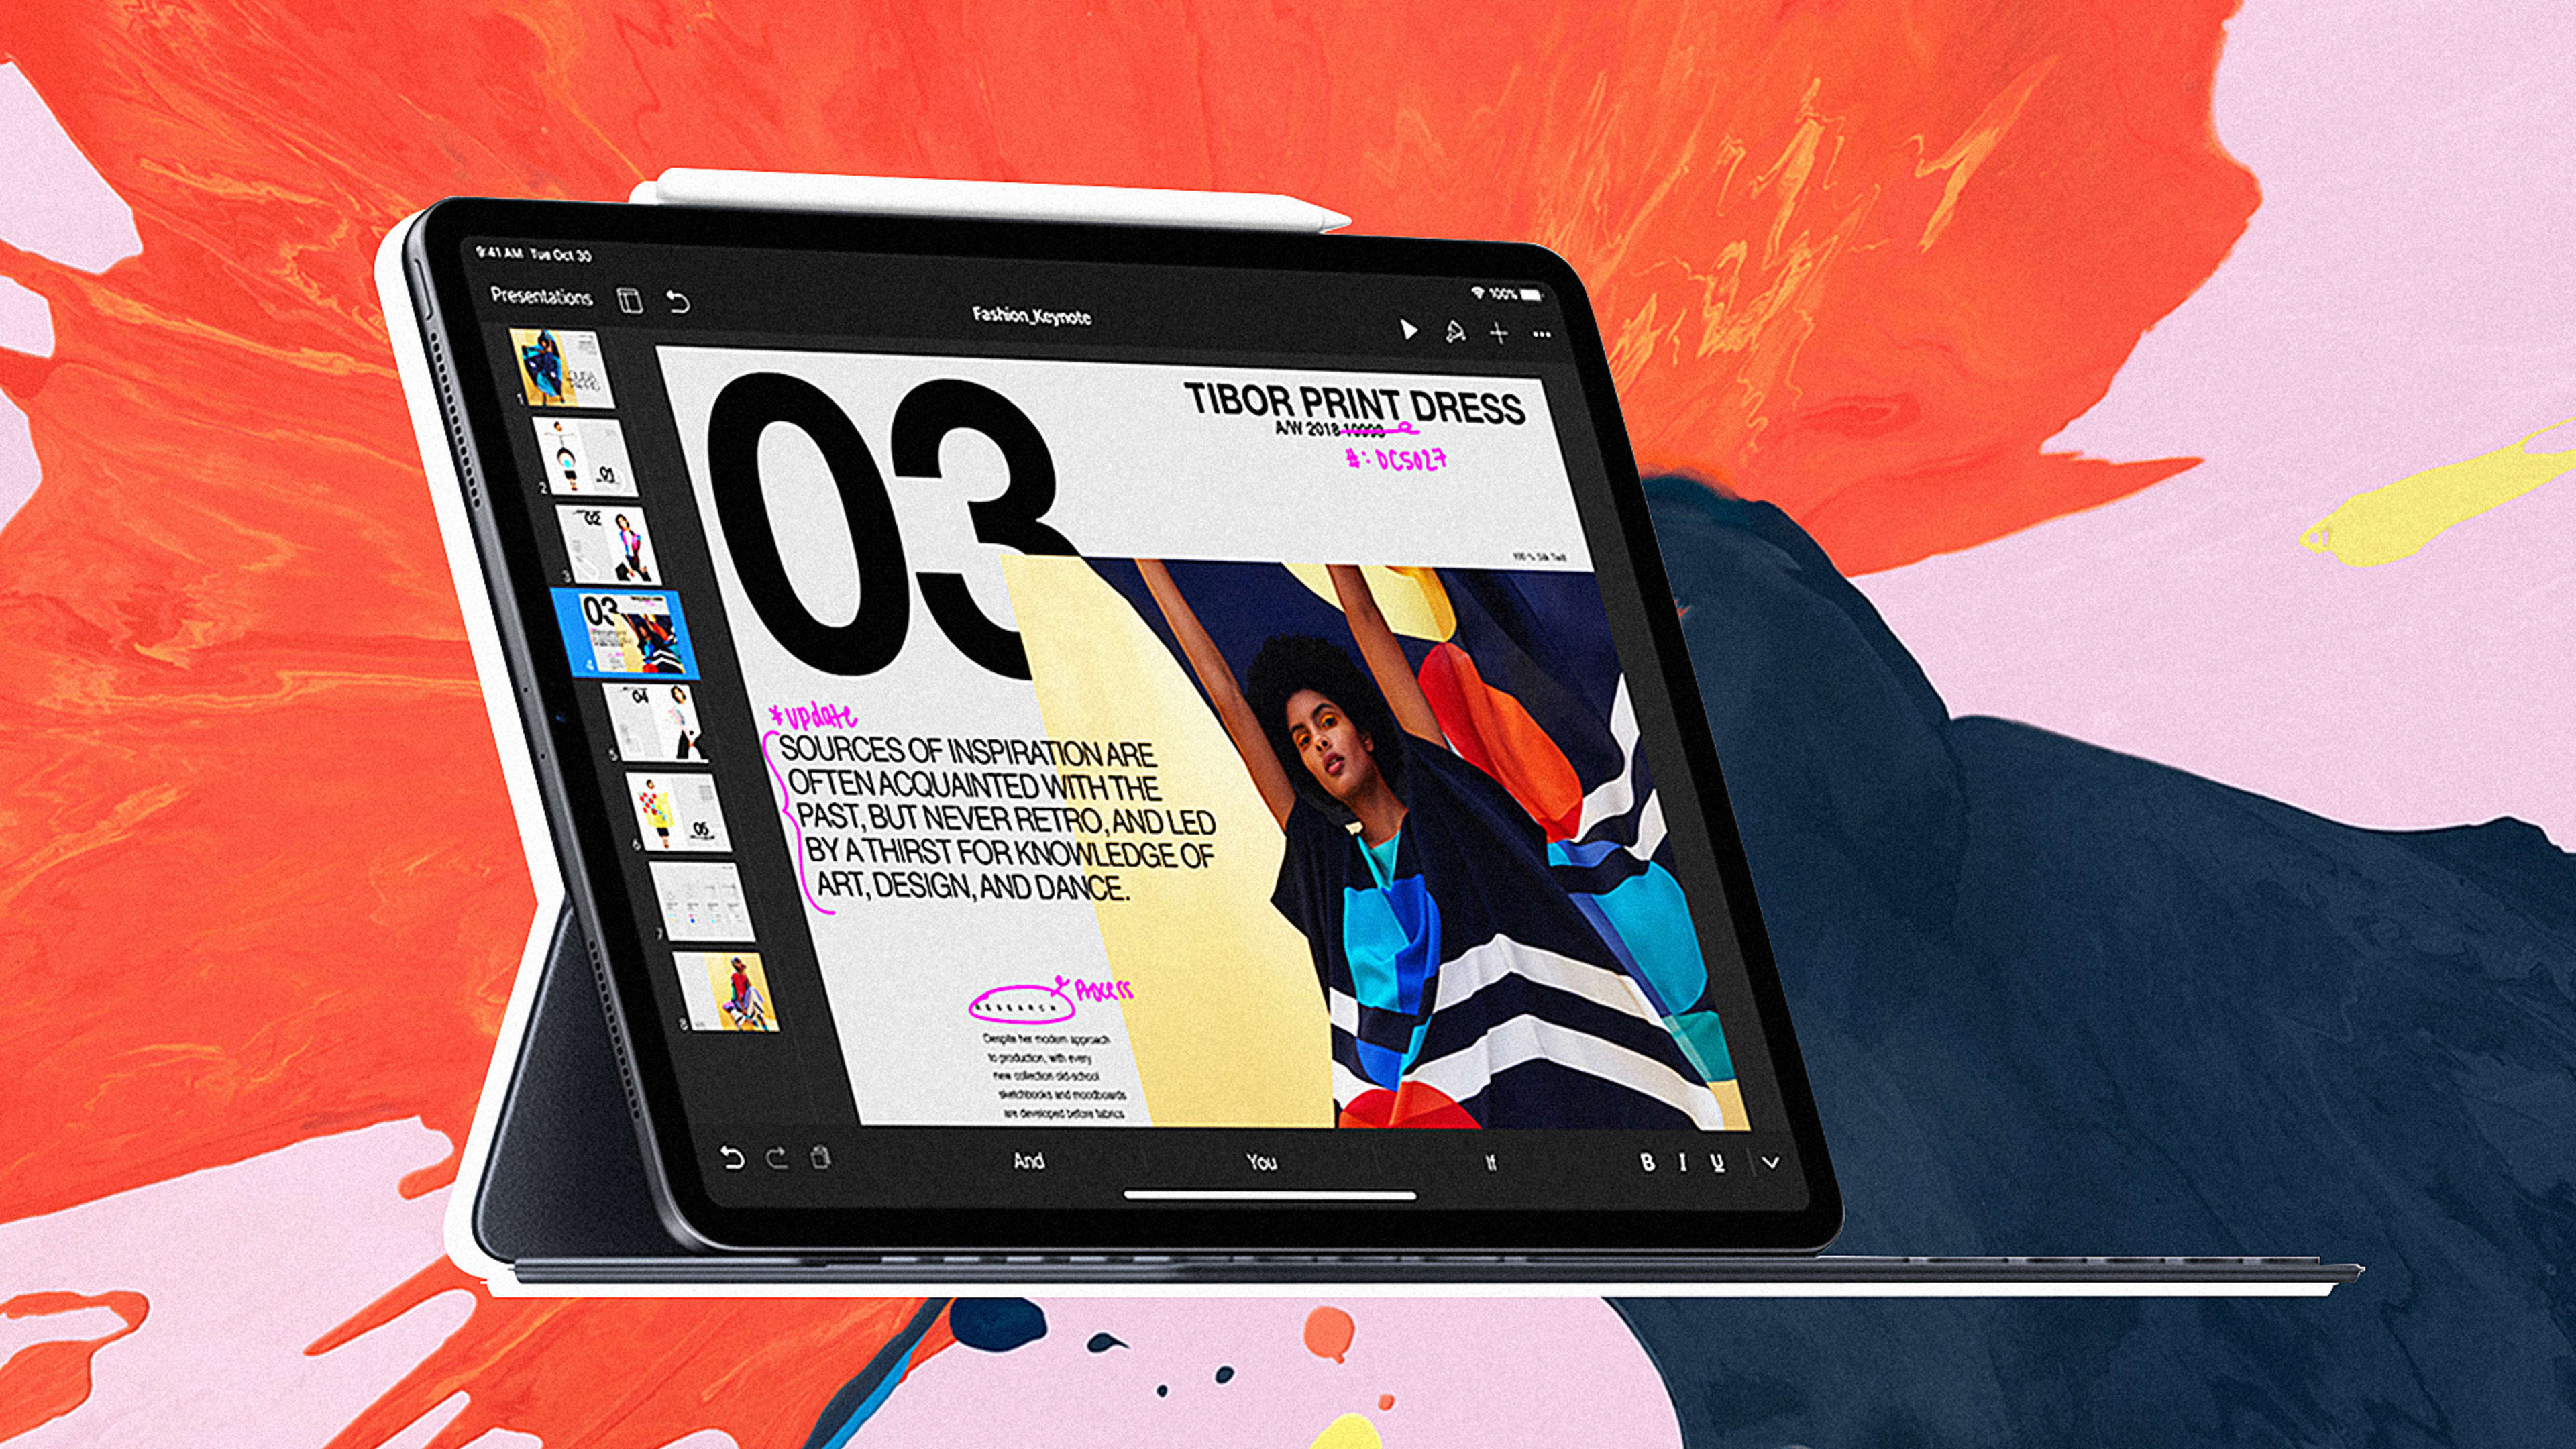 I ditched the Mac for the iPad, and I’ll never go back